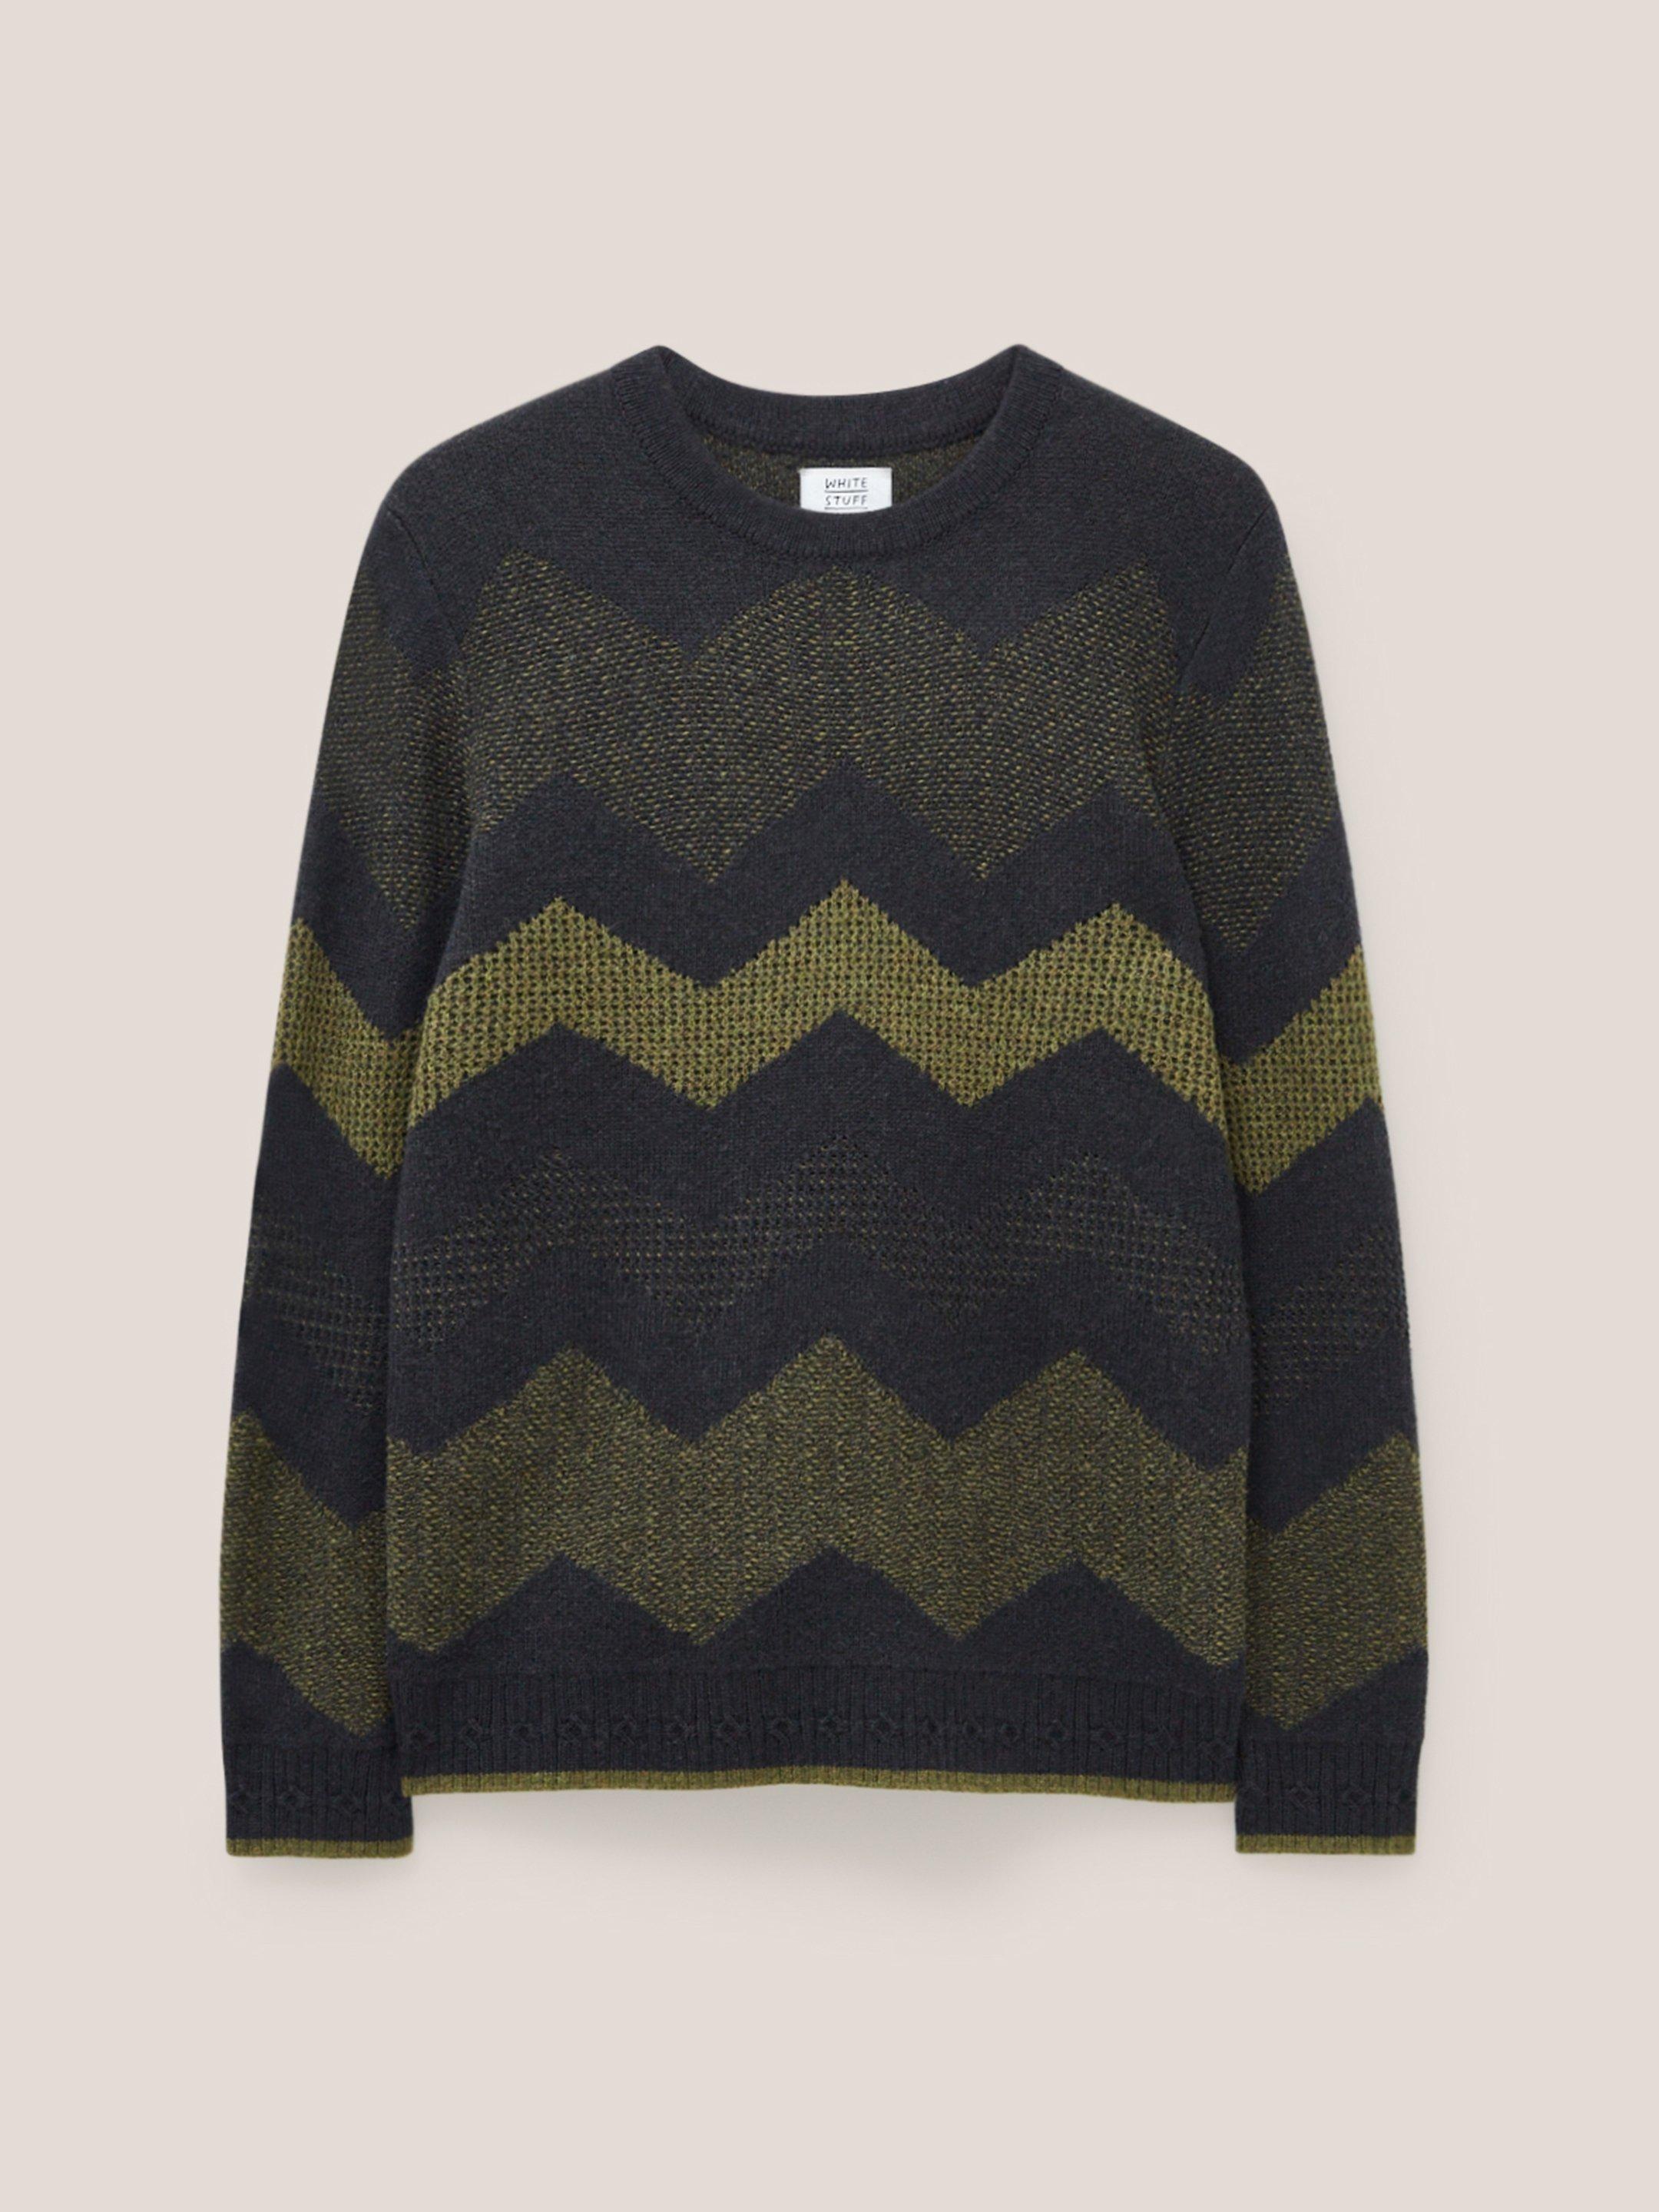 Zig Zag Textured Crew in CHARC GREY - FLAT FRONT